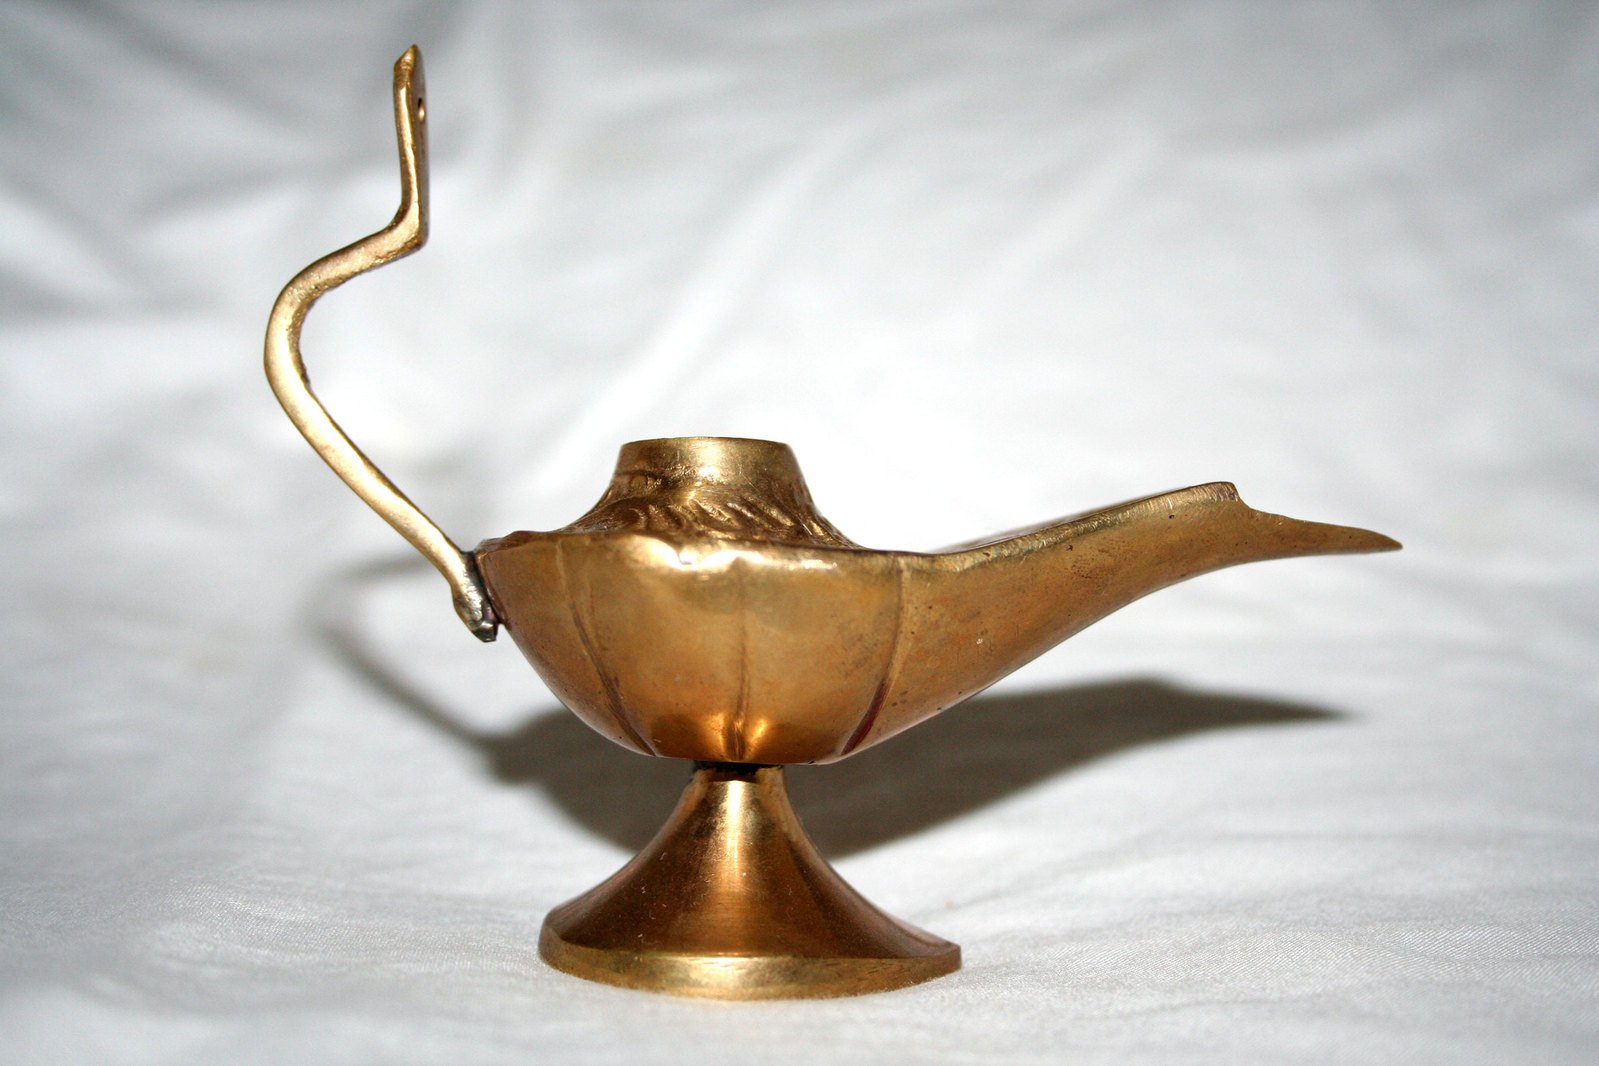 the gold bird has a long neck and curved stem